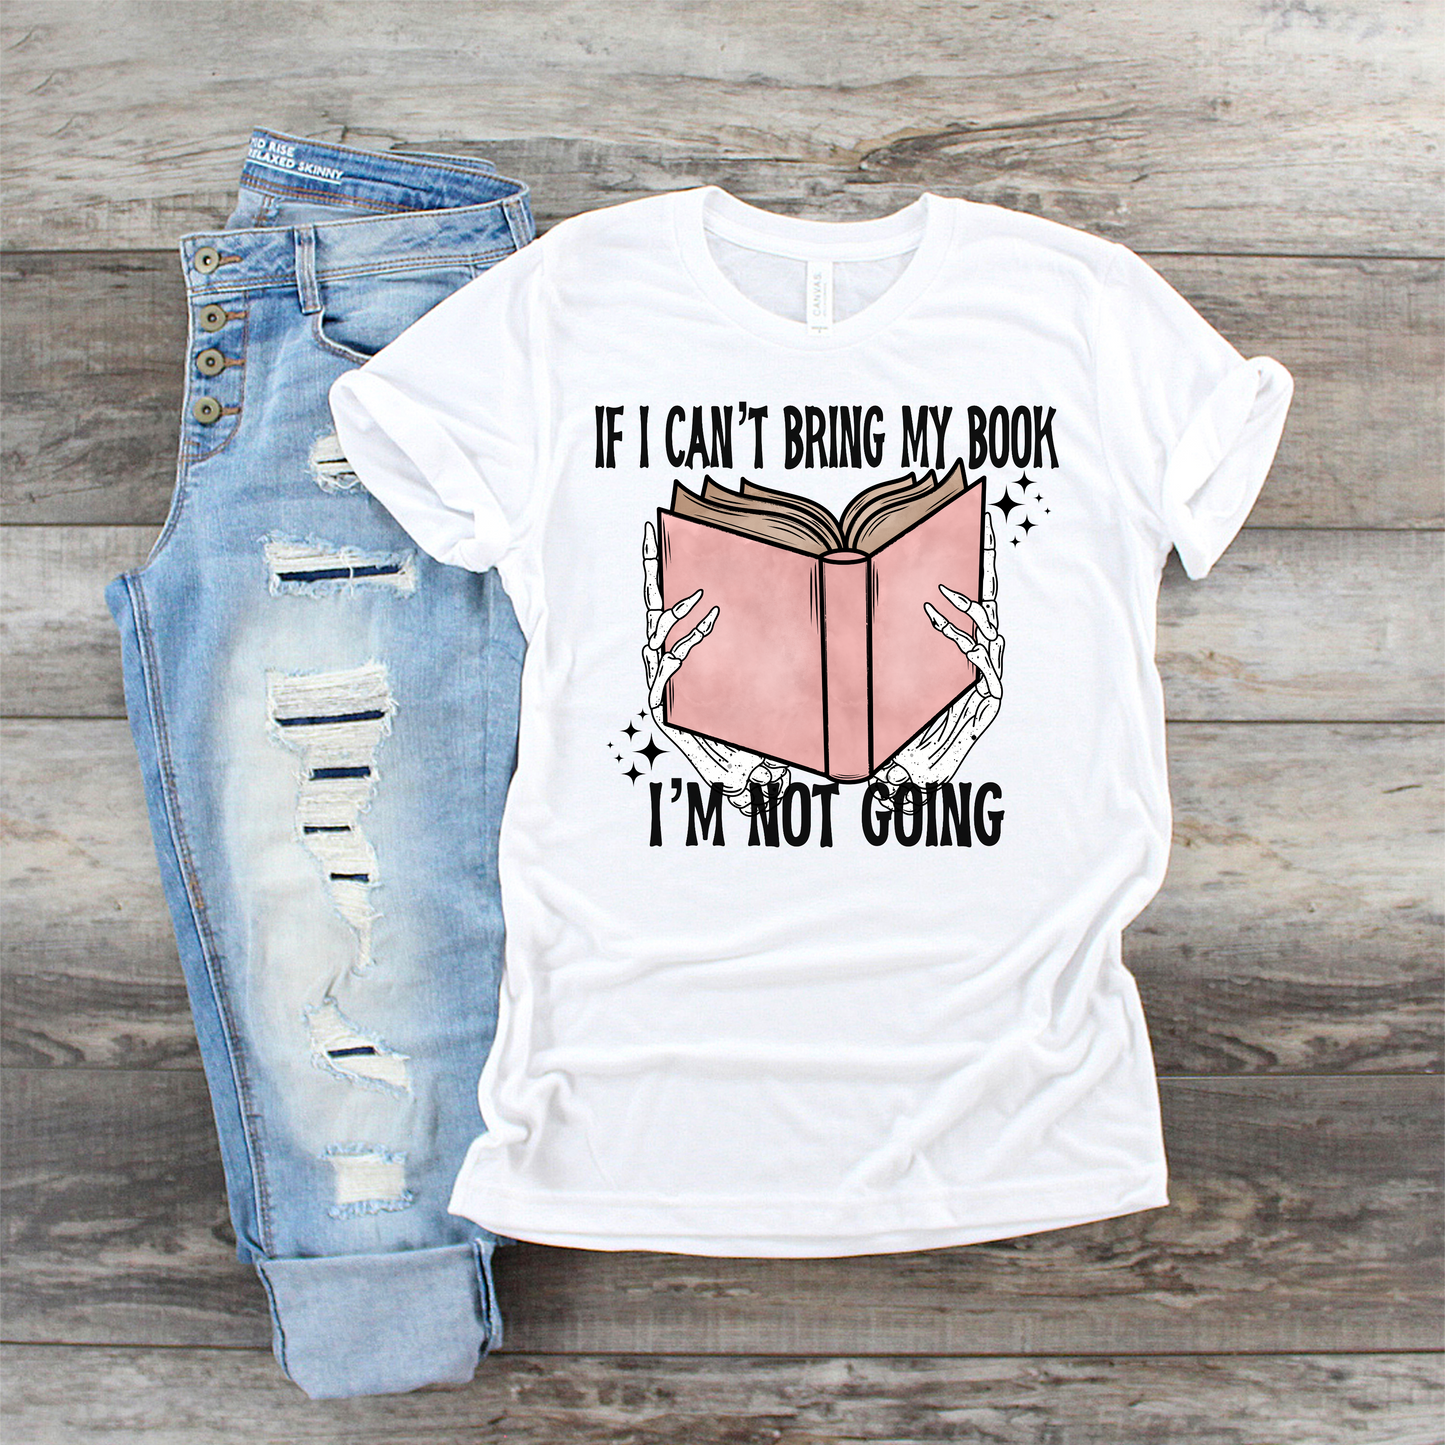 Bring my book graphic tee